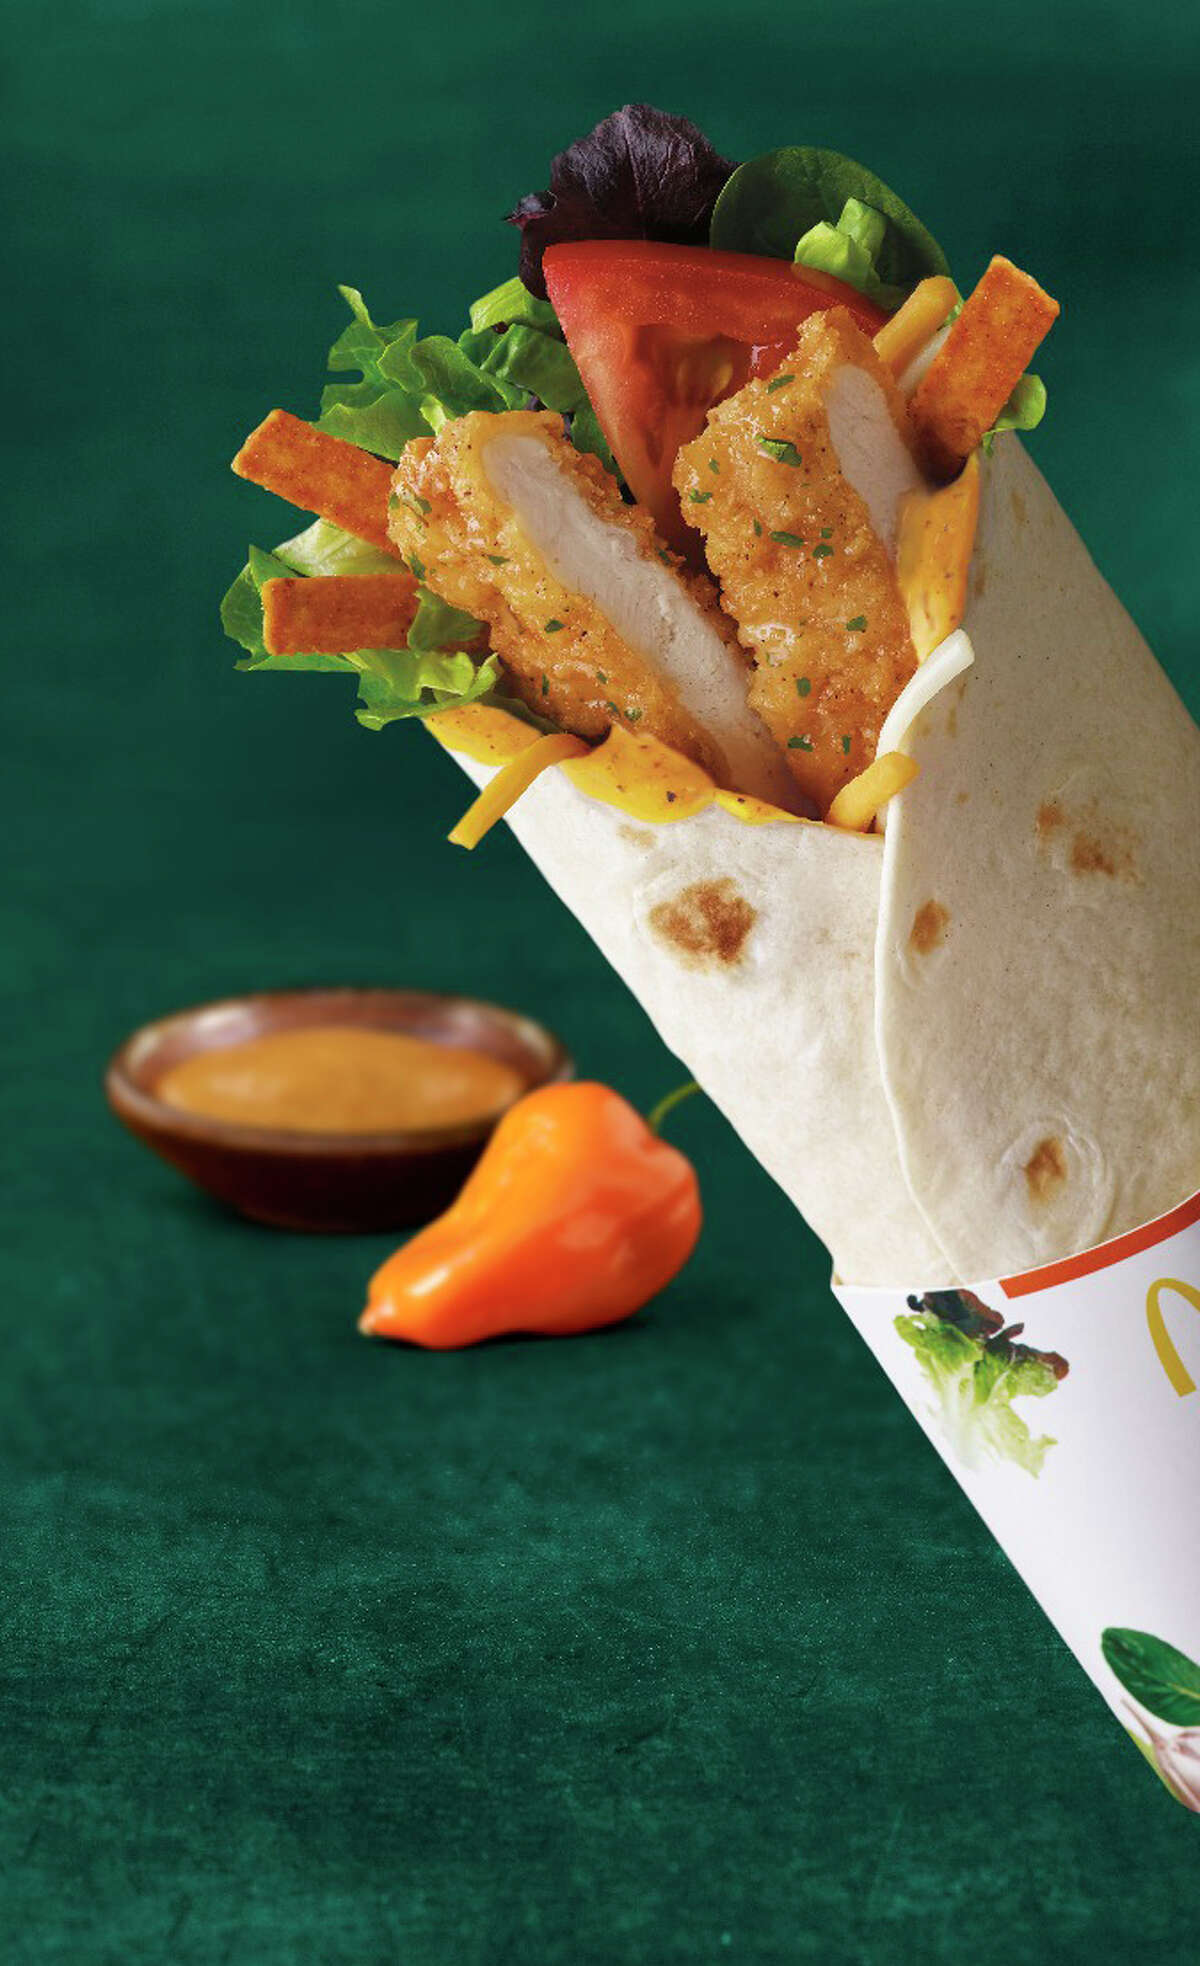 The Southwest Chicken McWrap at McDonald's is a guilty pleasure that is worth its 520 calories and 20 fat grams.